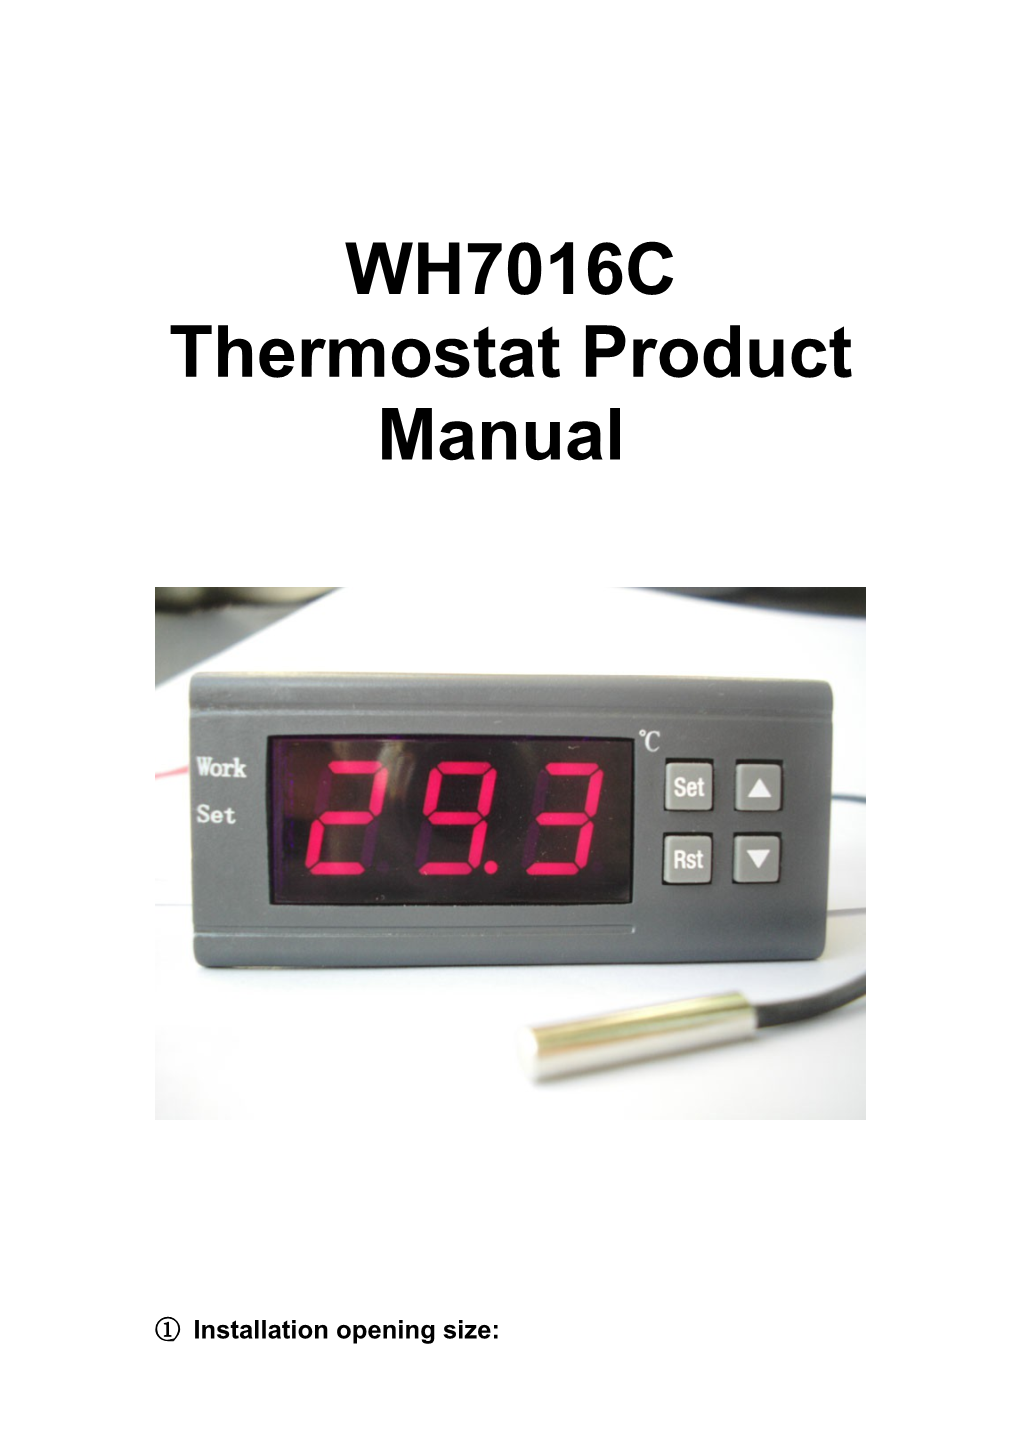 Thermostat Product Manual